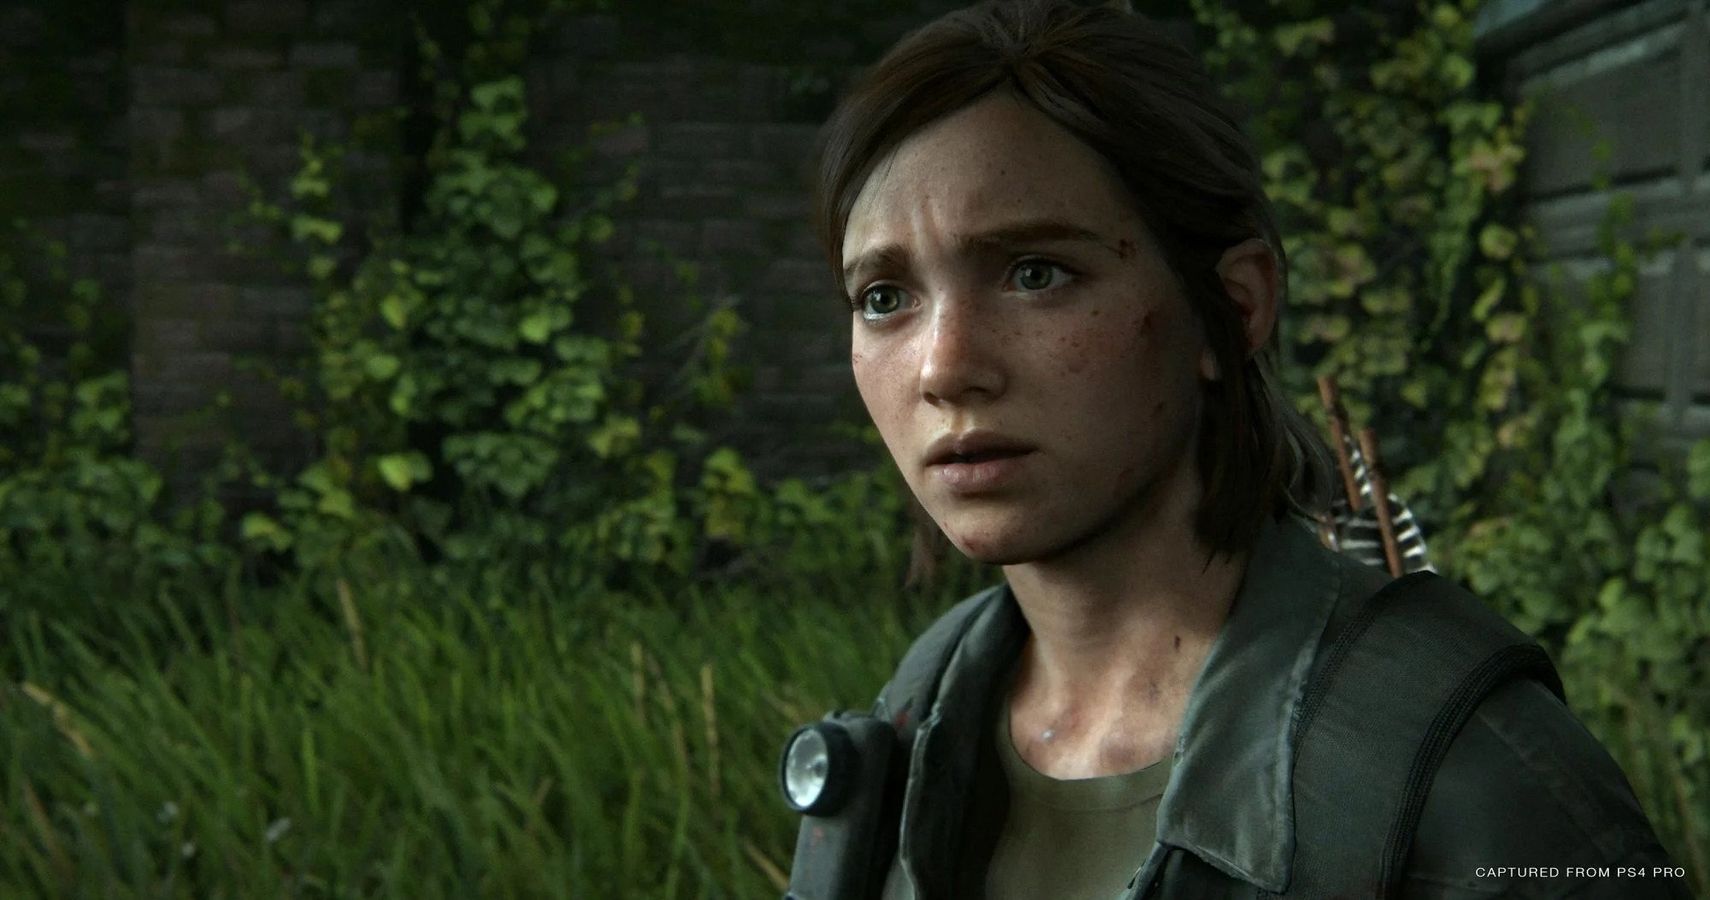 The Last of Us' Season 2 Needs to Fix the Second Game's Biggest Flaw